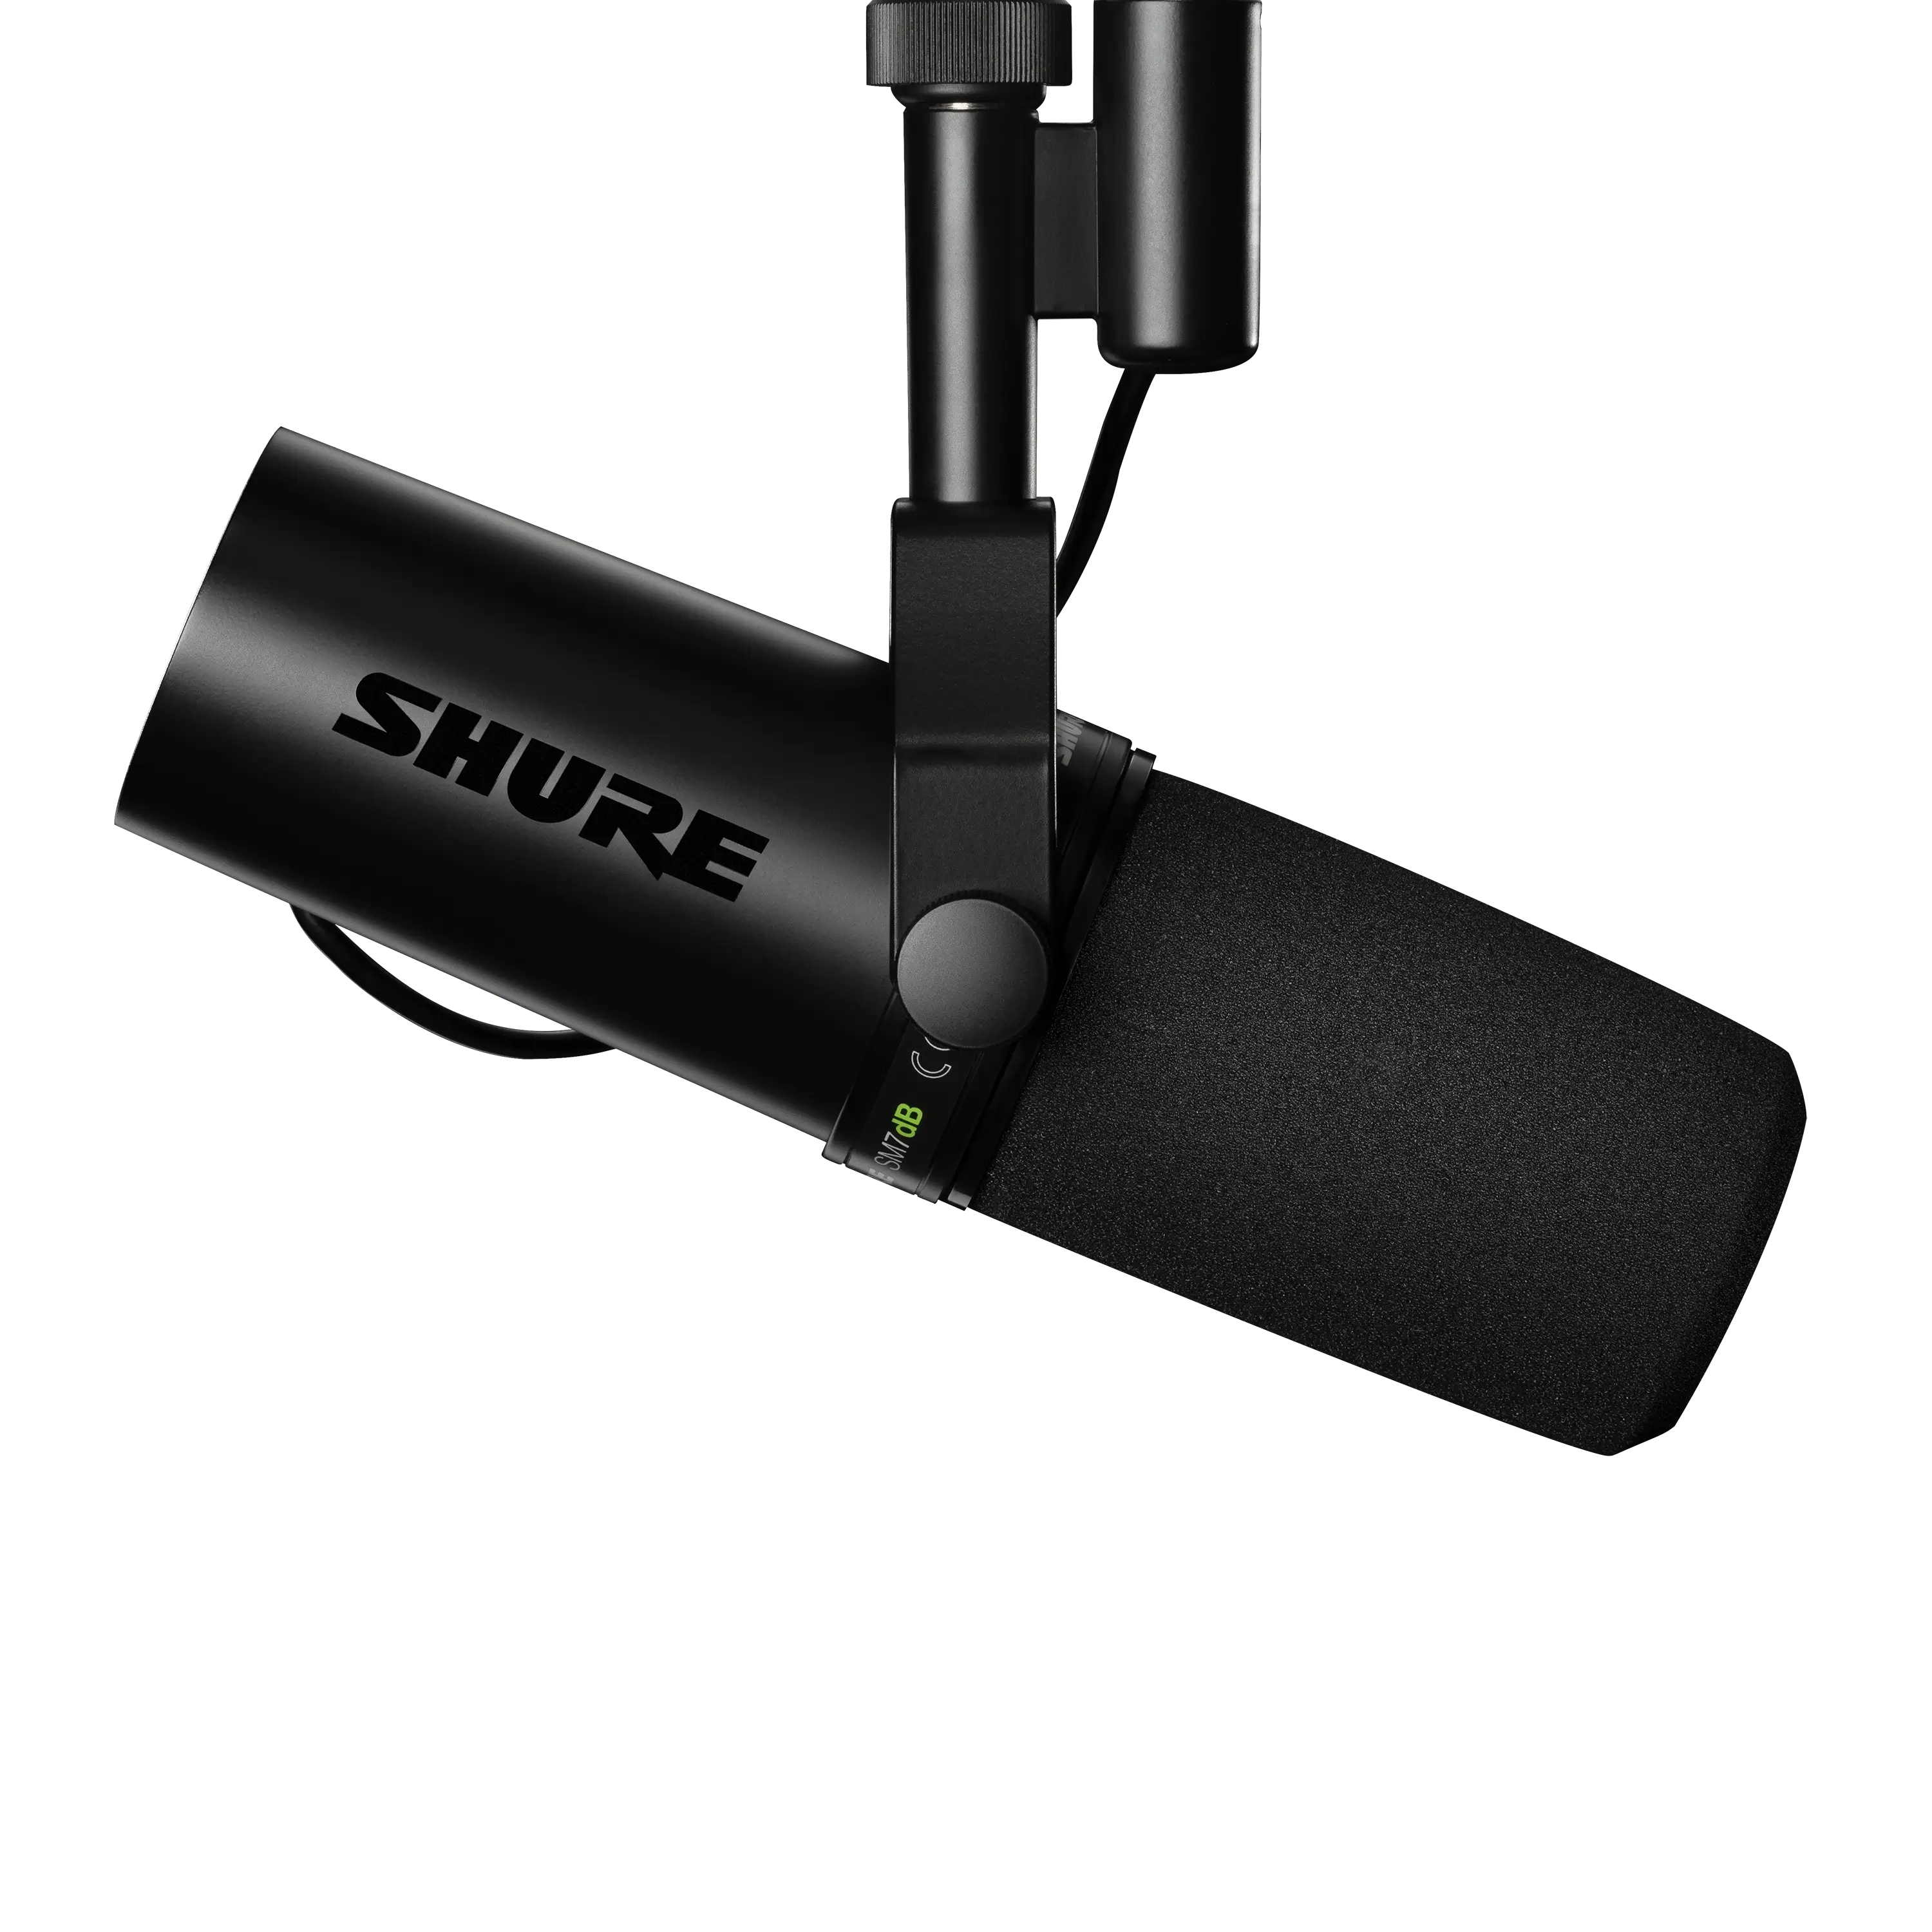 SHURE SM7B elgato waveマイクアーム付き - 配信機器・PA機器 